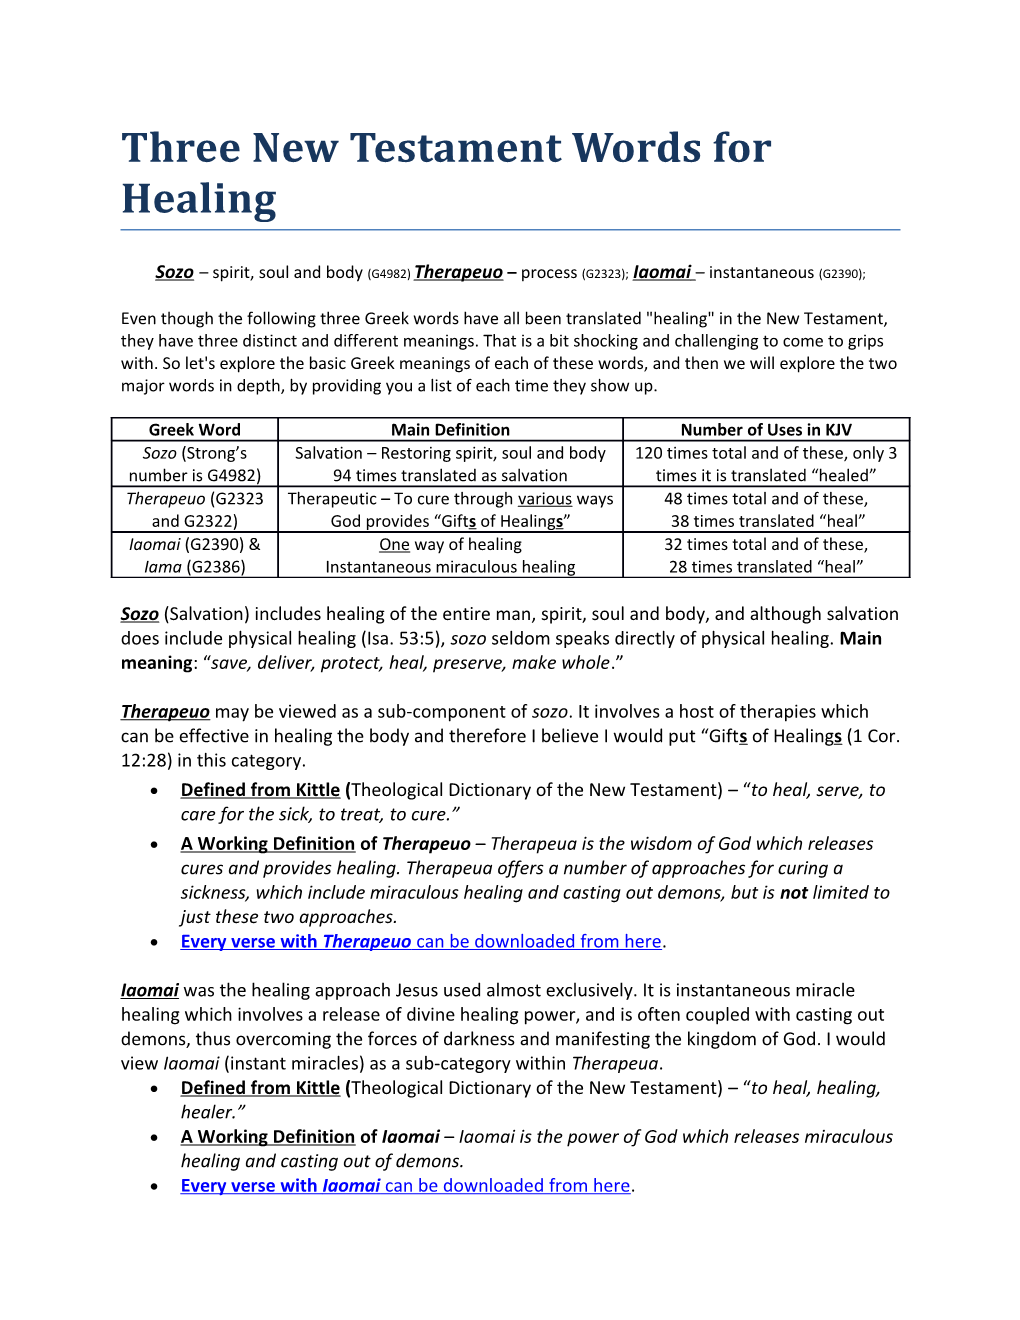 Three New Testament Words for Healing